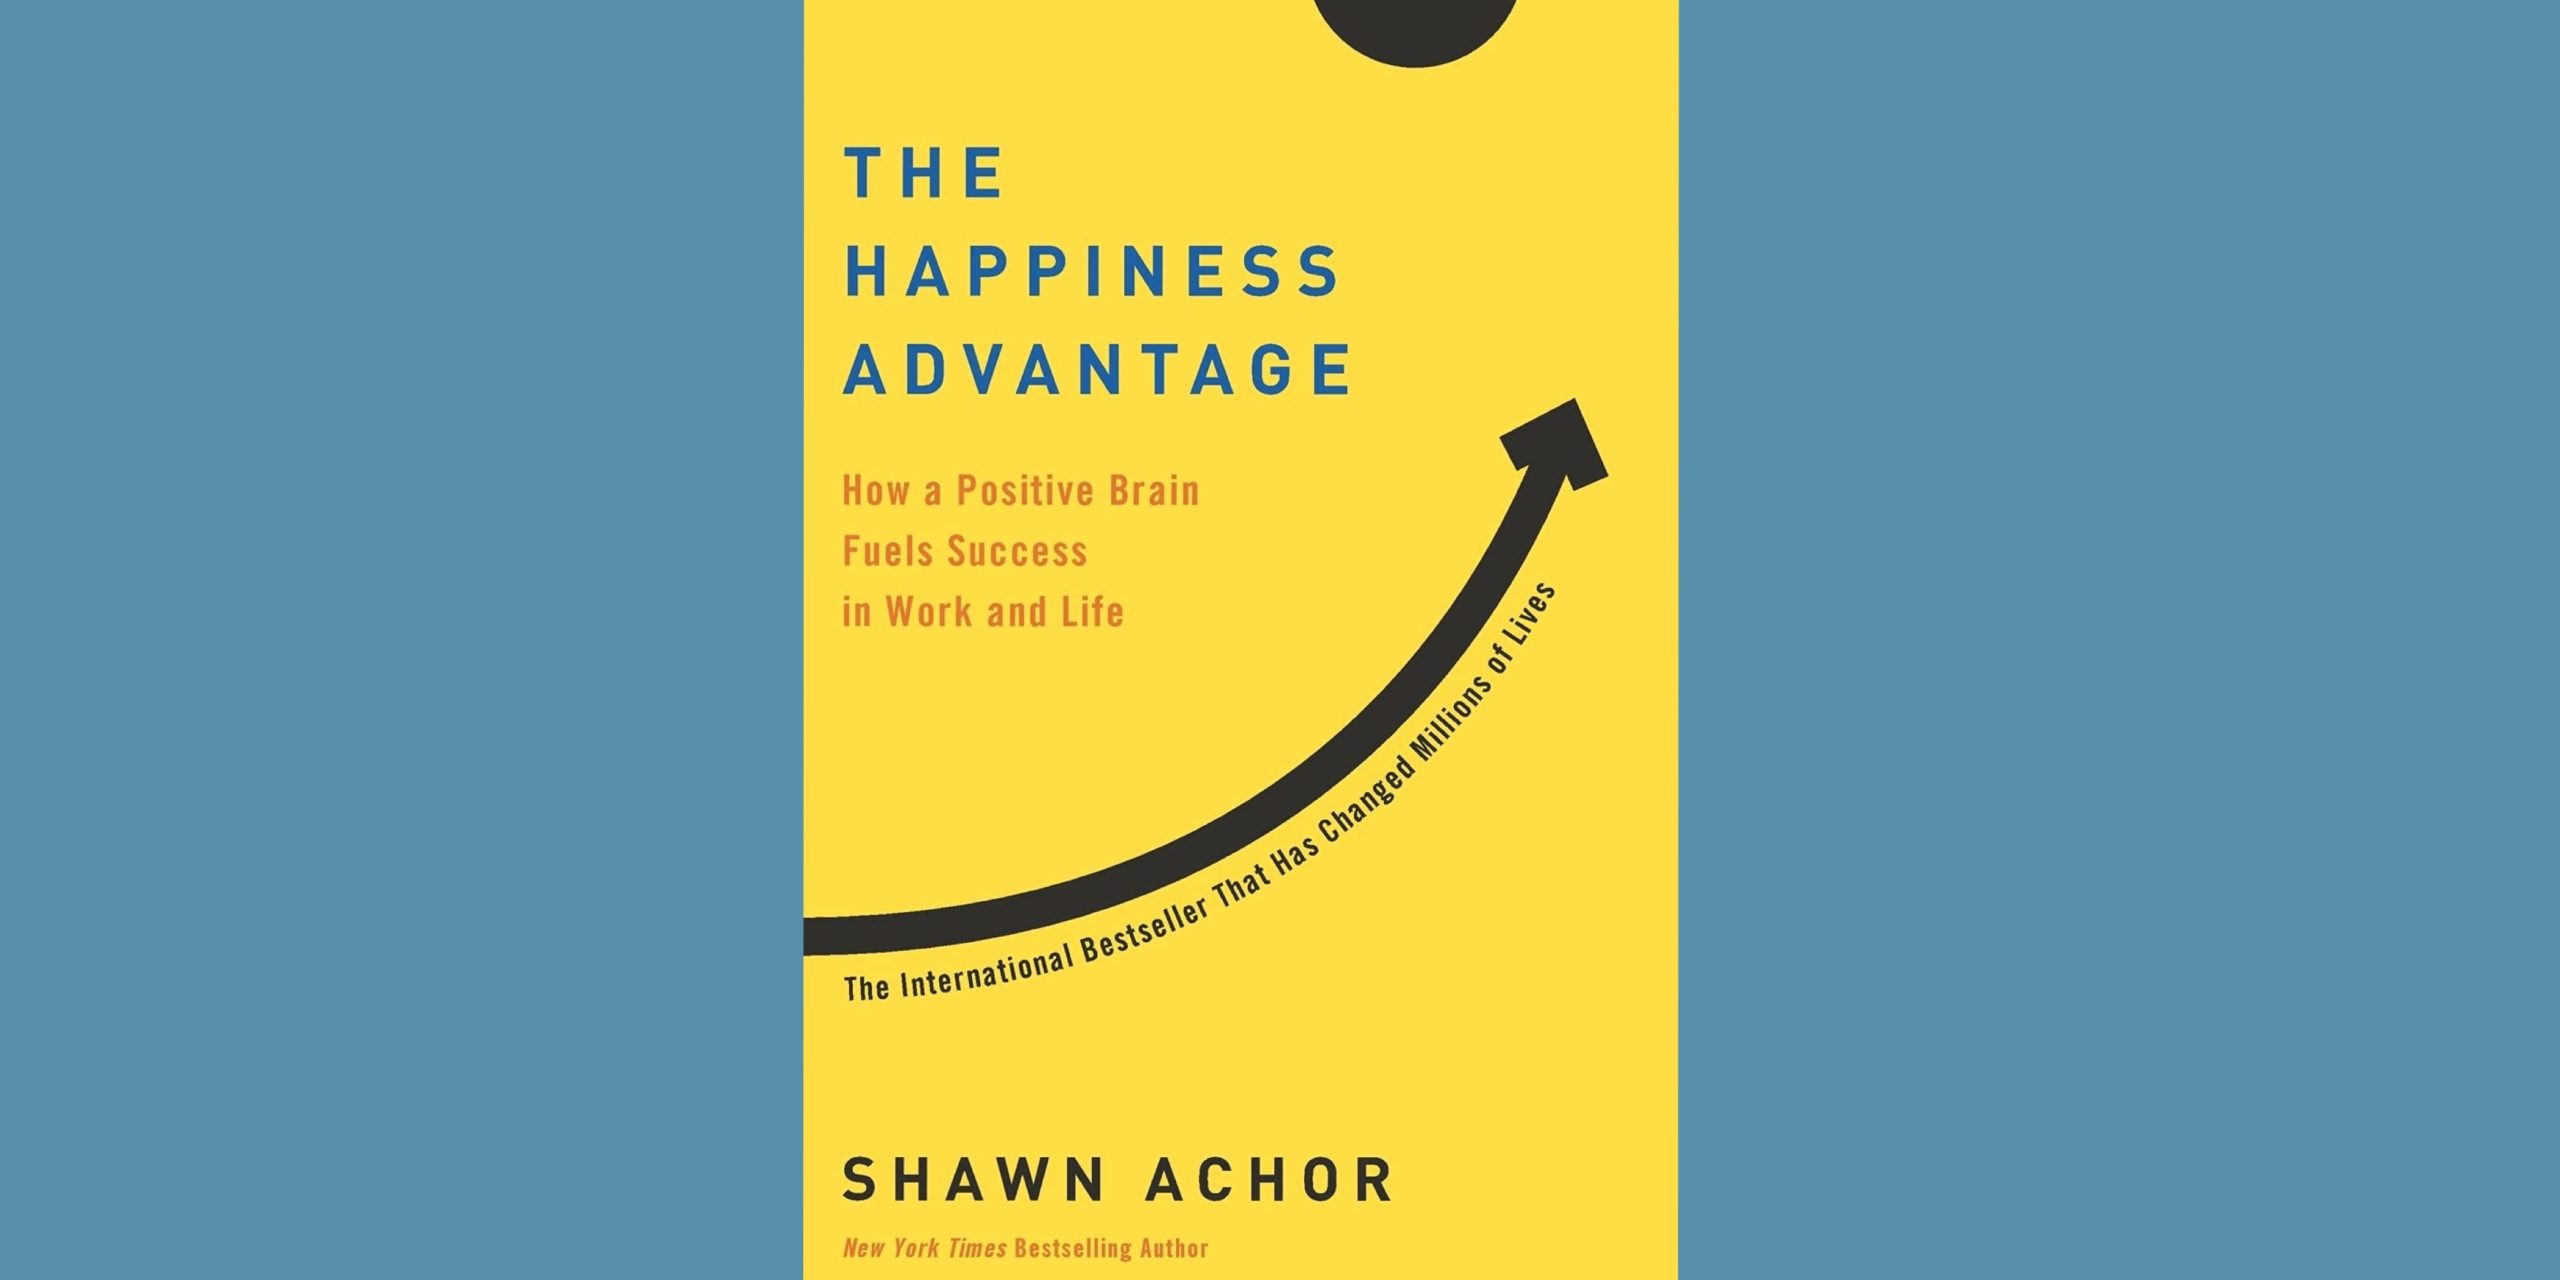 The Happiness Advantage and How It Improves Productivity